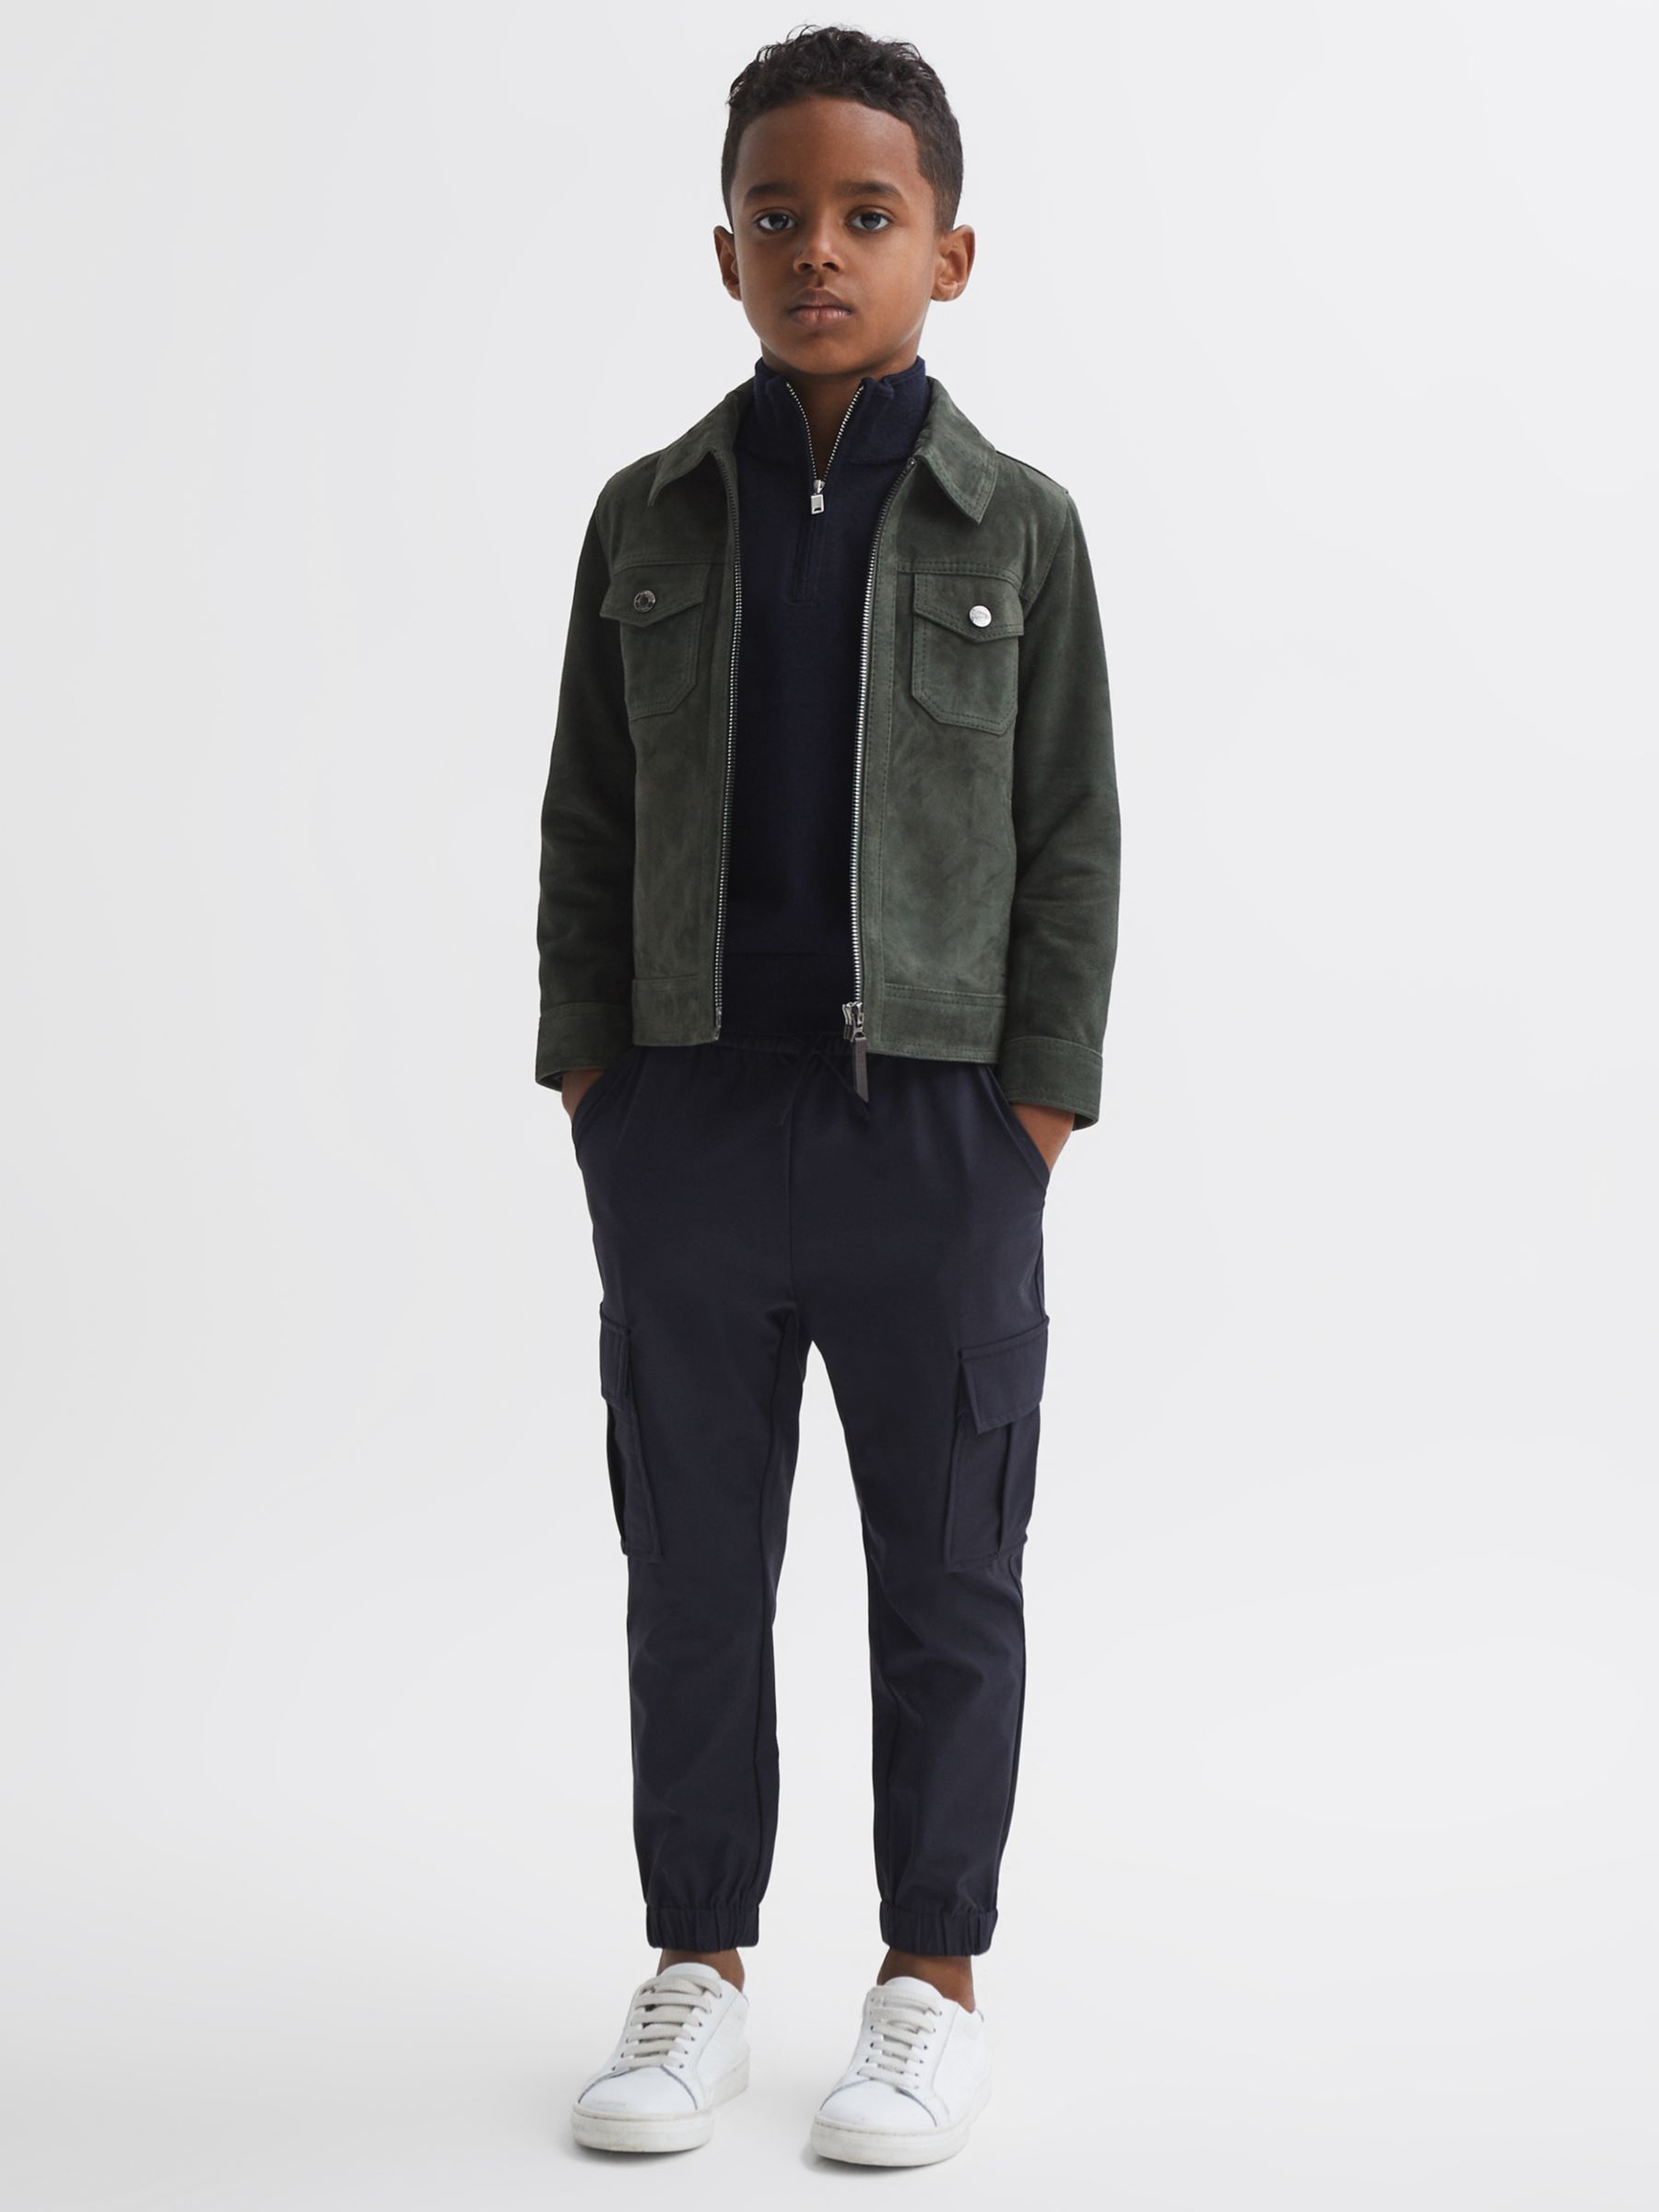 Reiss Kids' Pike Suede Jacket, Forest Green, 10-11 years